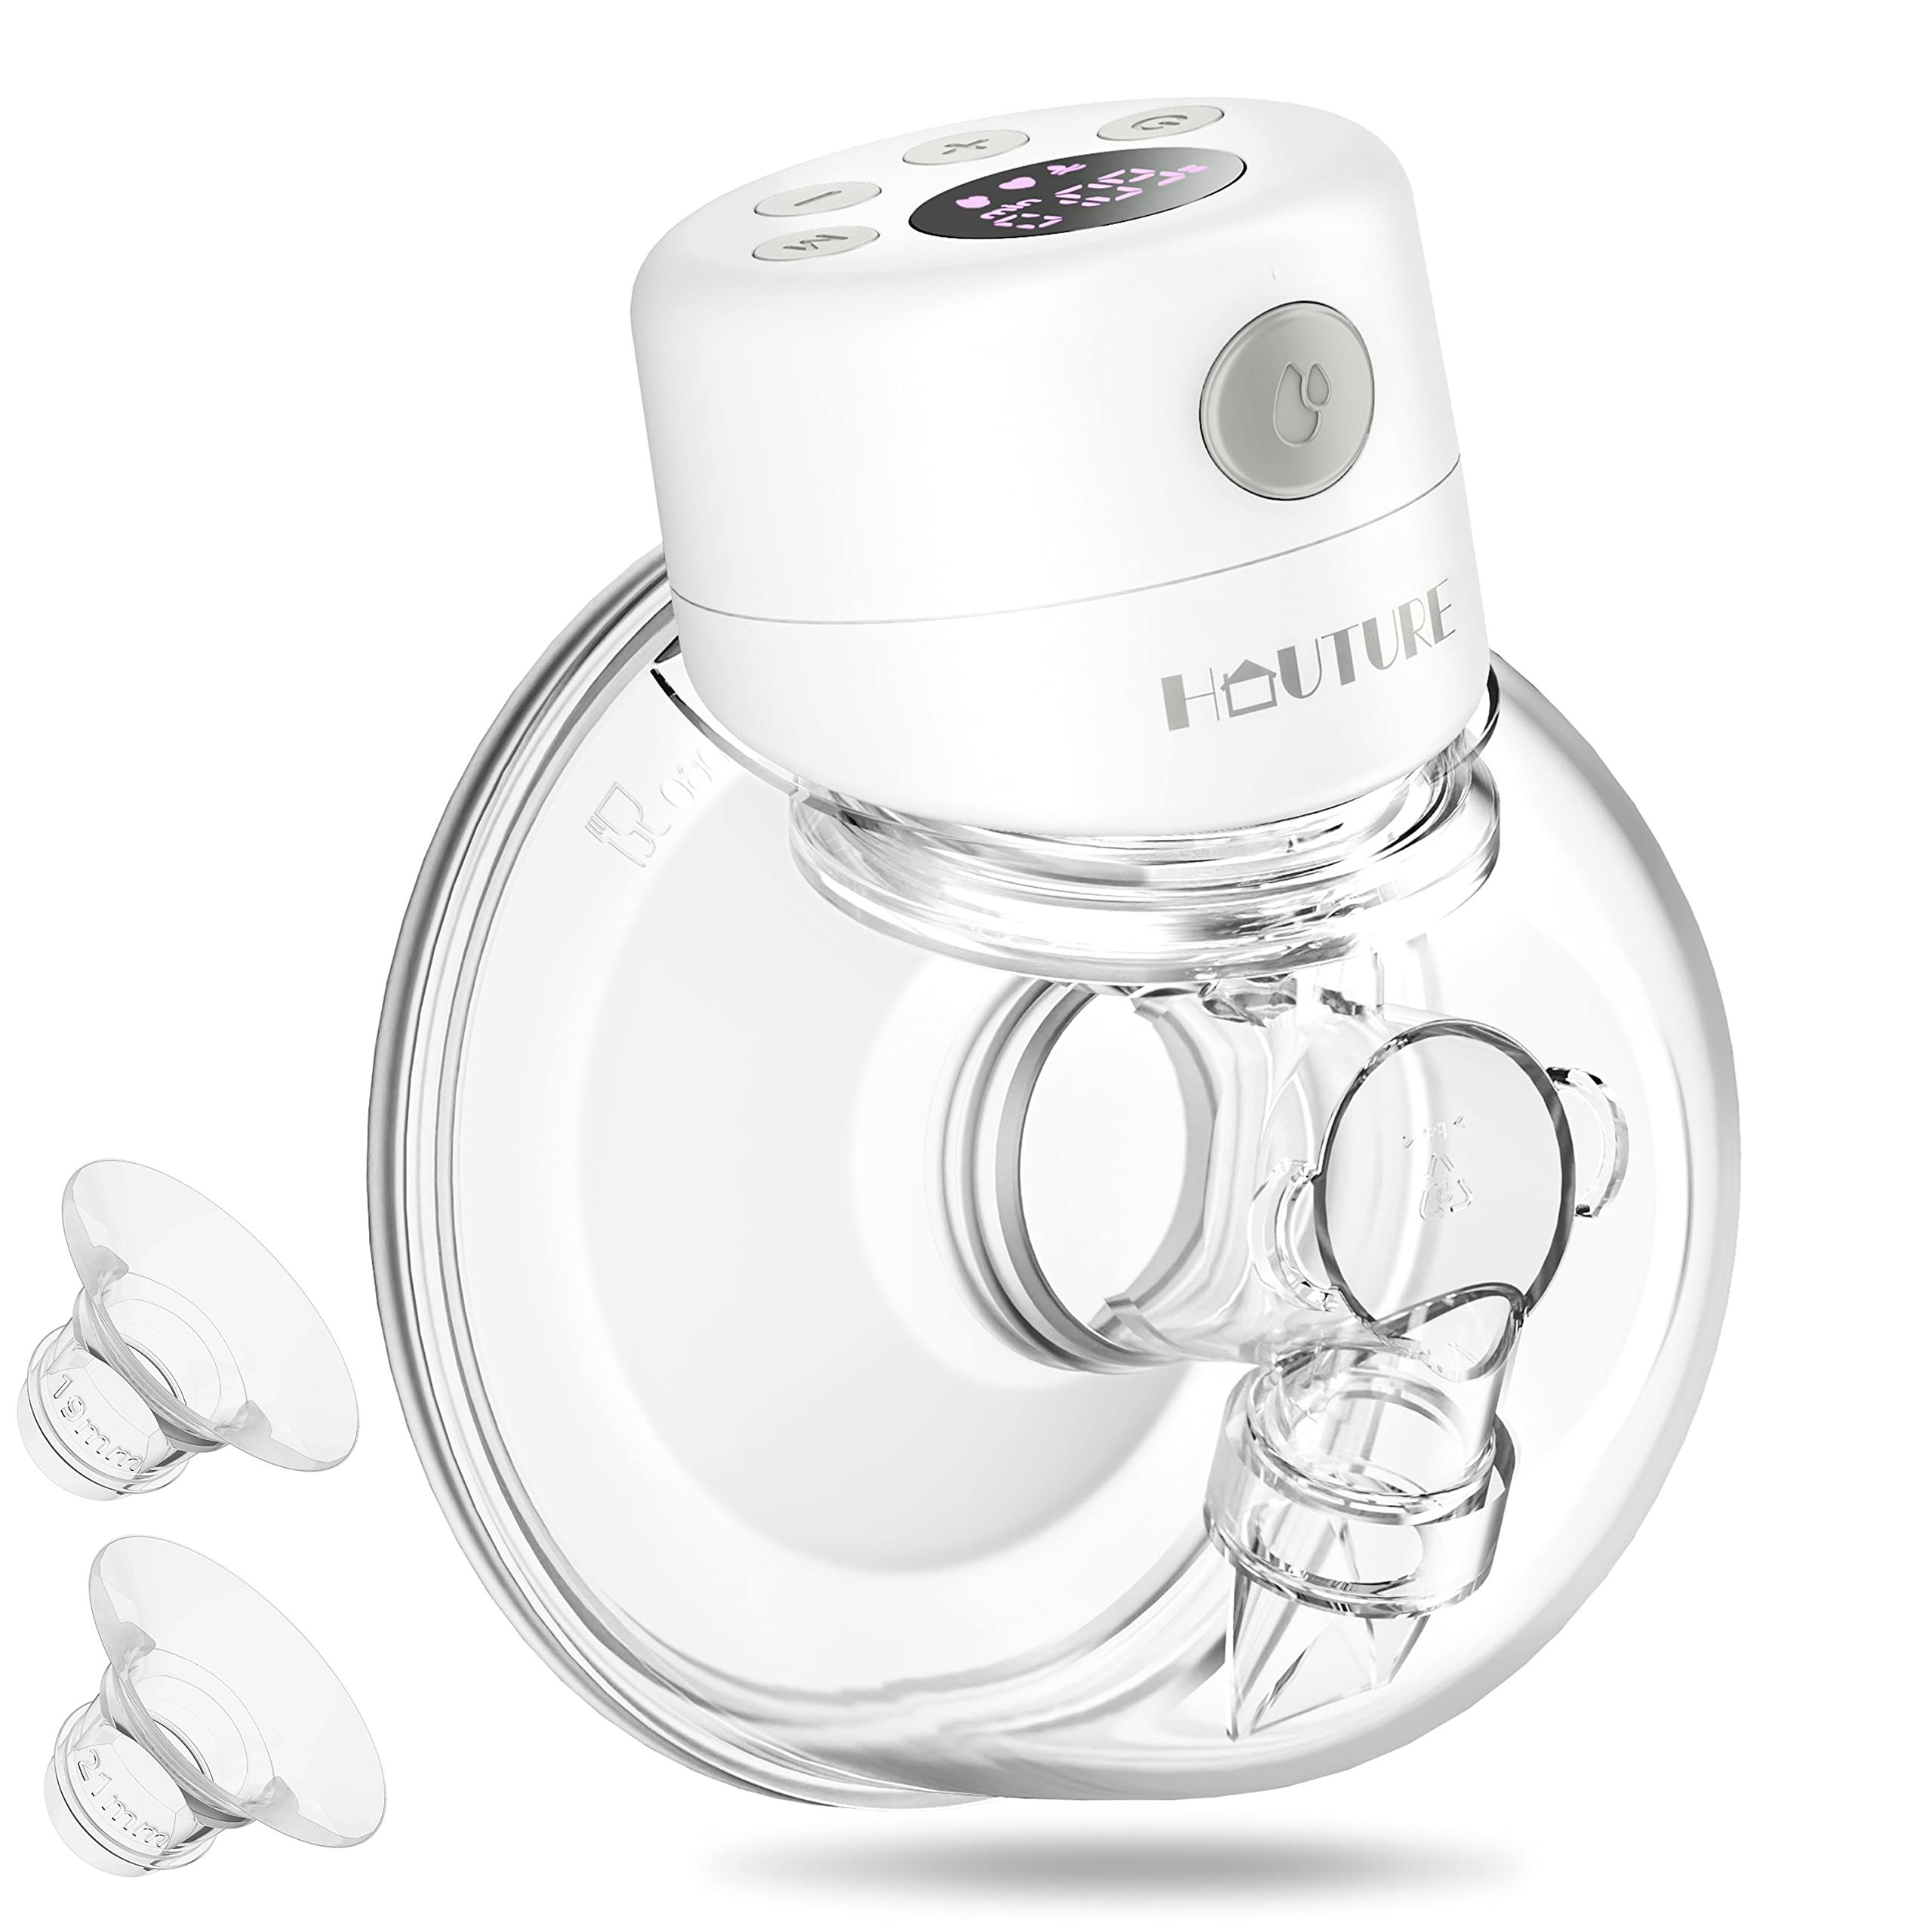 Wearable Breast Pump, HAUTURE Electric Breast Pump, Hands Free & Low Noise Portable Breast Pump w... | Amazon (US)